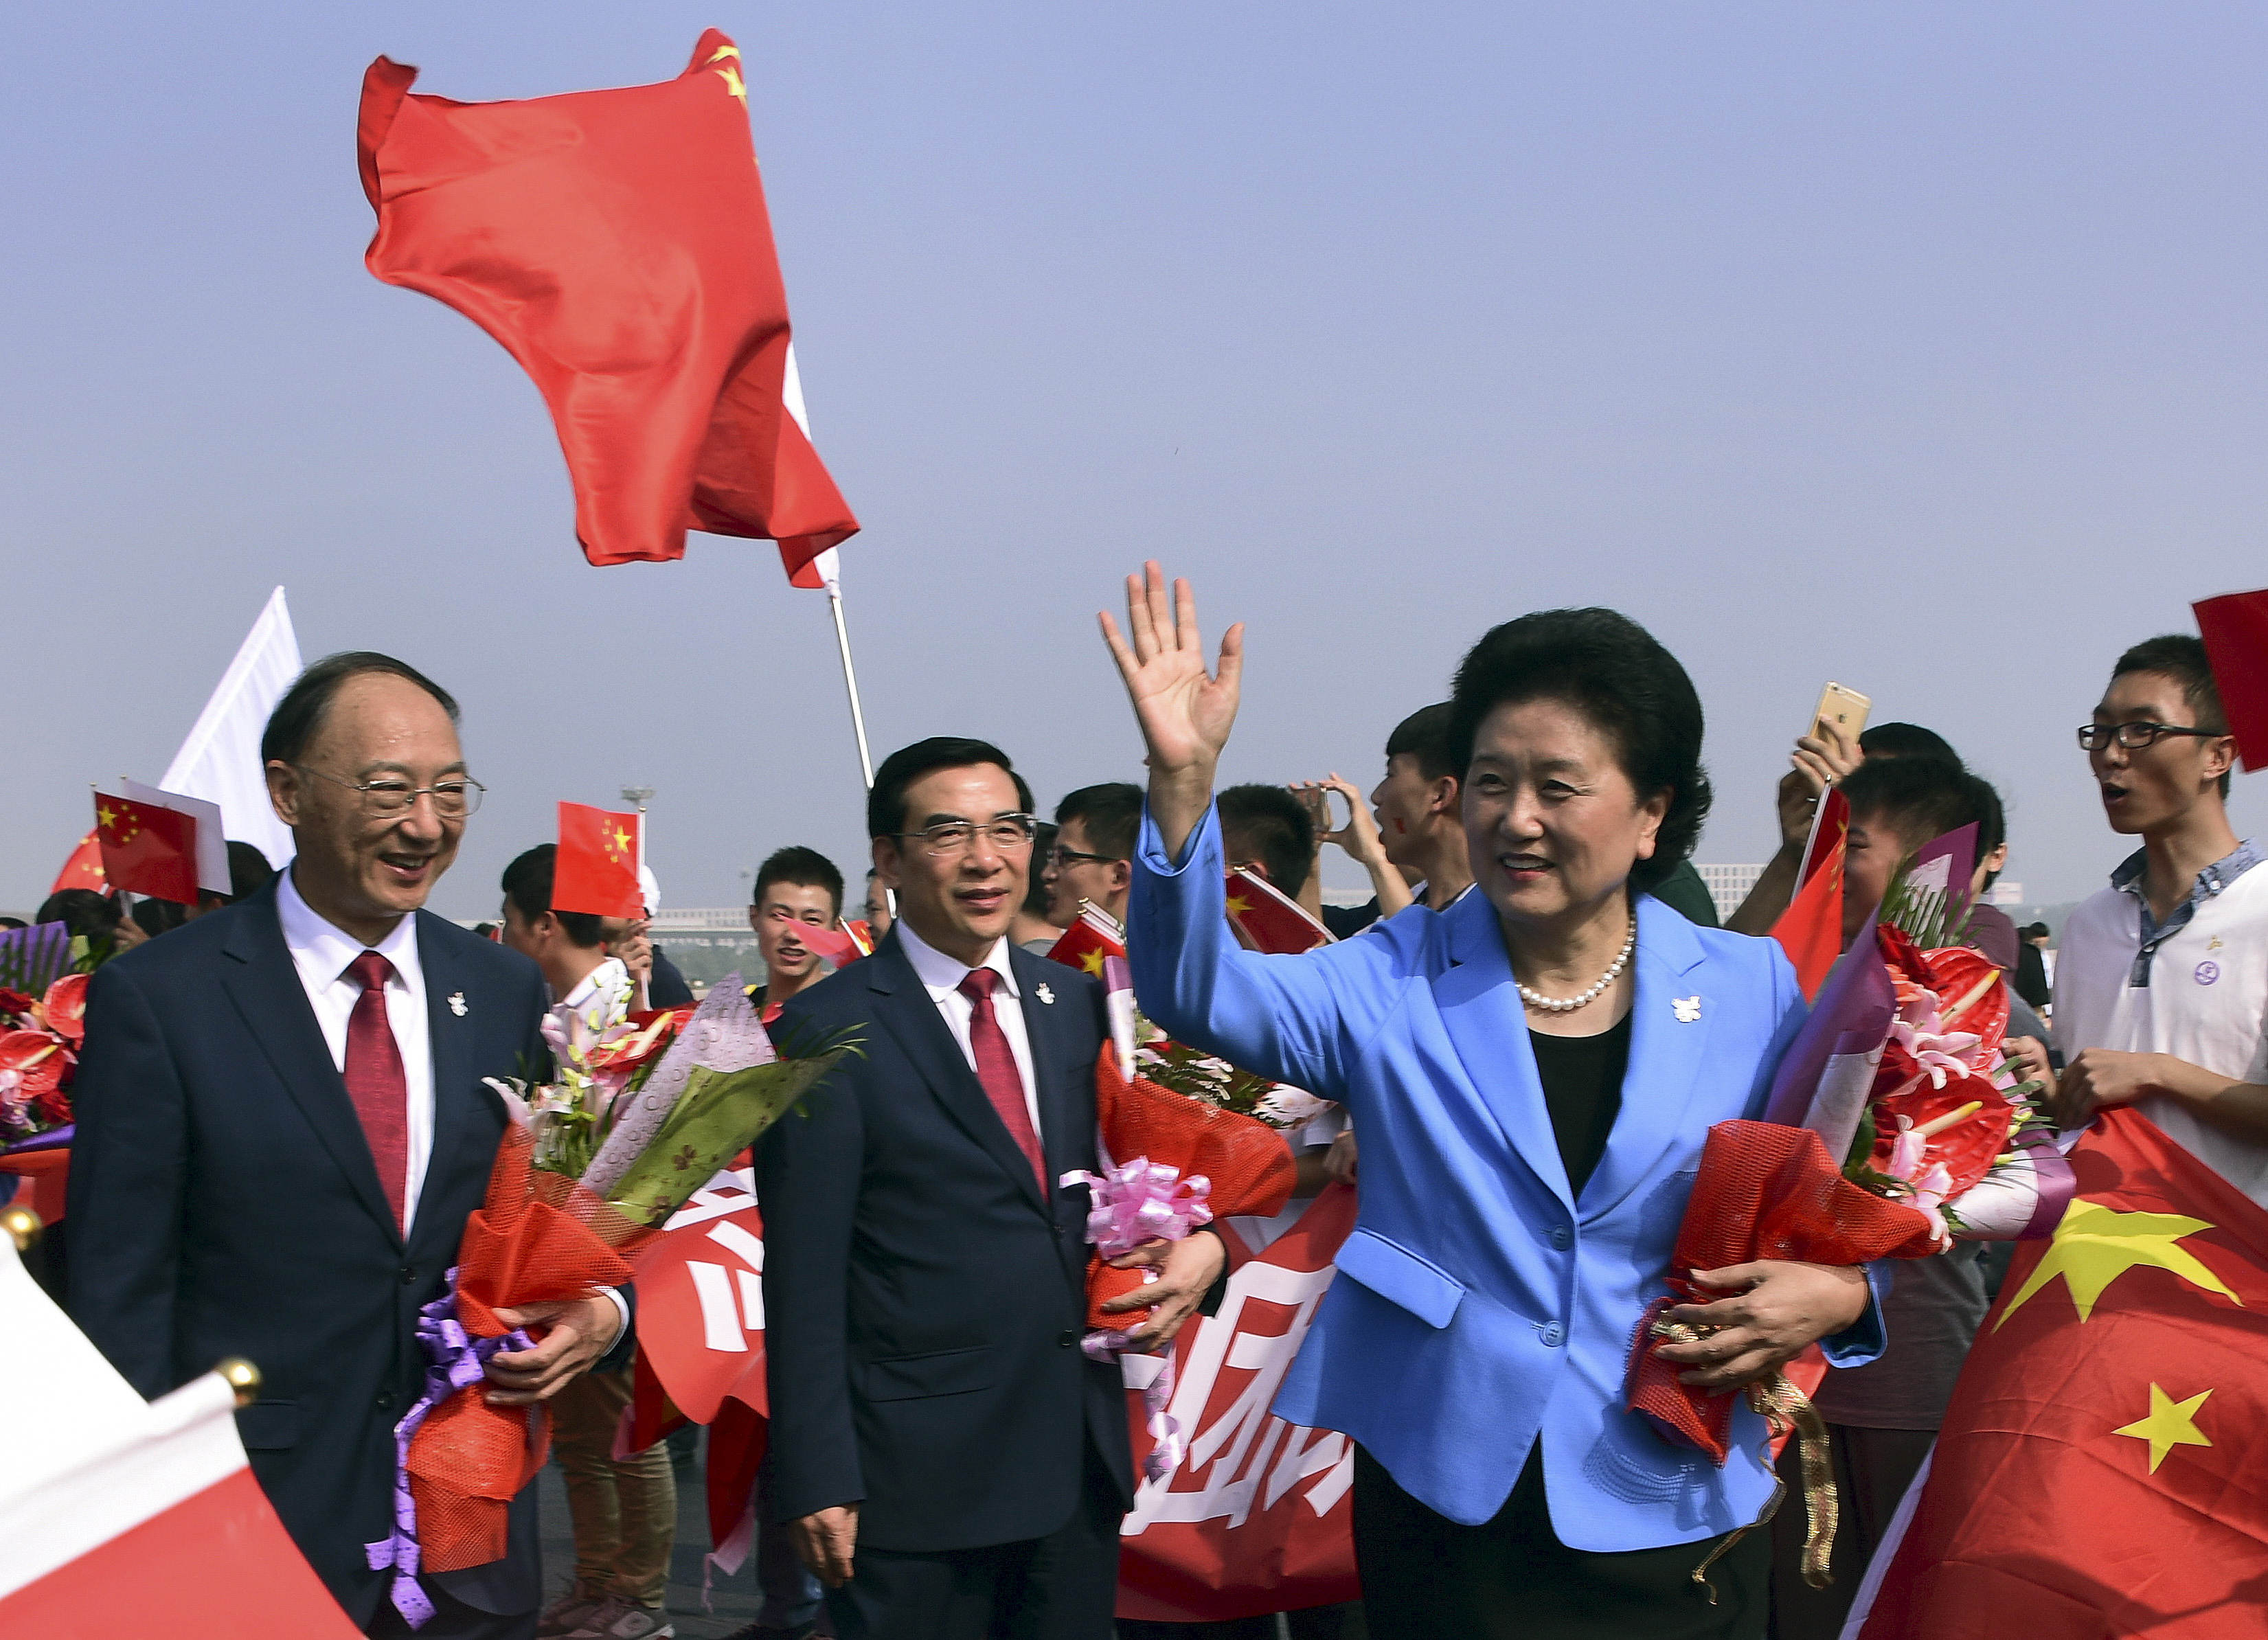 Status of China's women leaders on the eve of 19th Party Congress